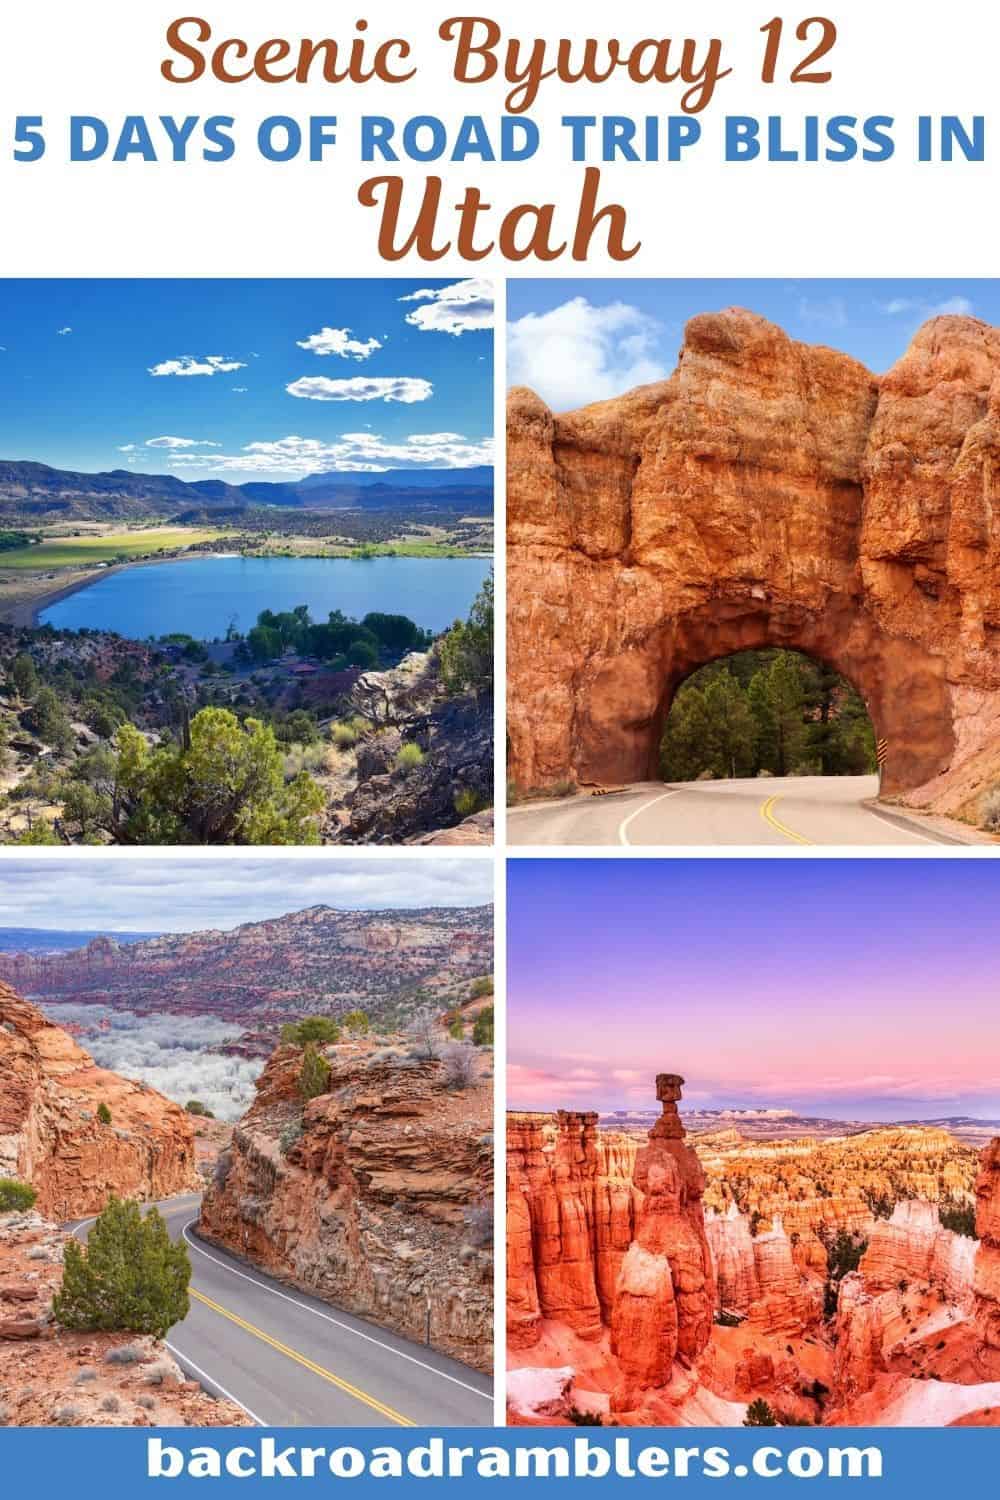 A collage of photos featuring Utah Highway 12. Caption reads 5 days of road trip bliss on Scenic Byway 12 in Utah. 